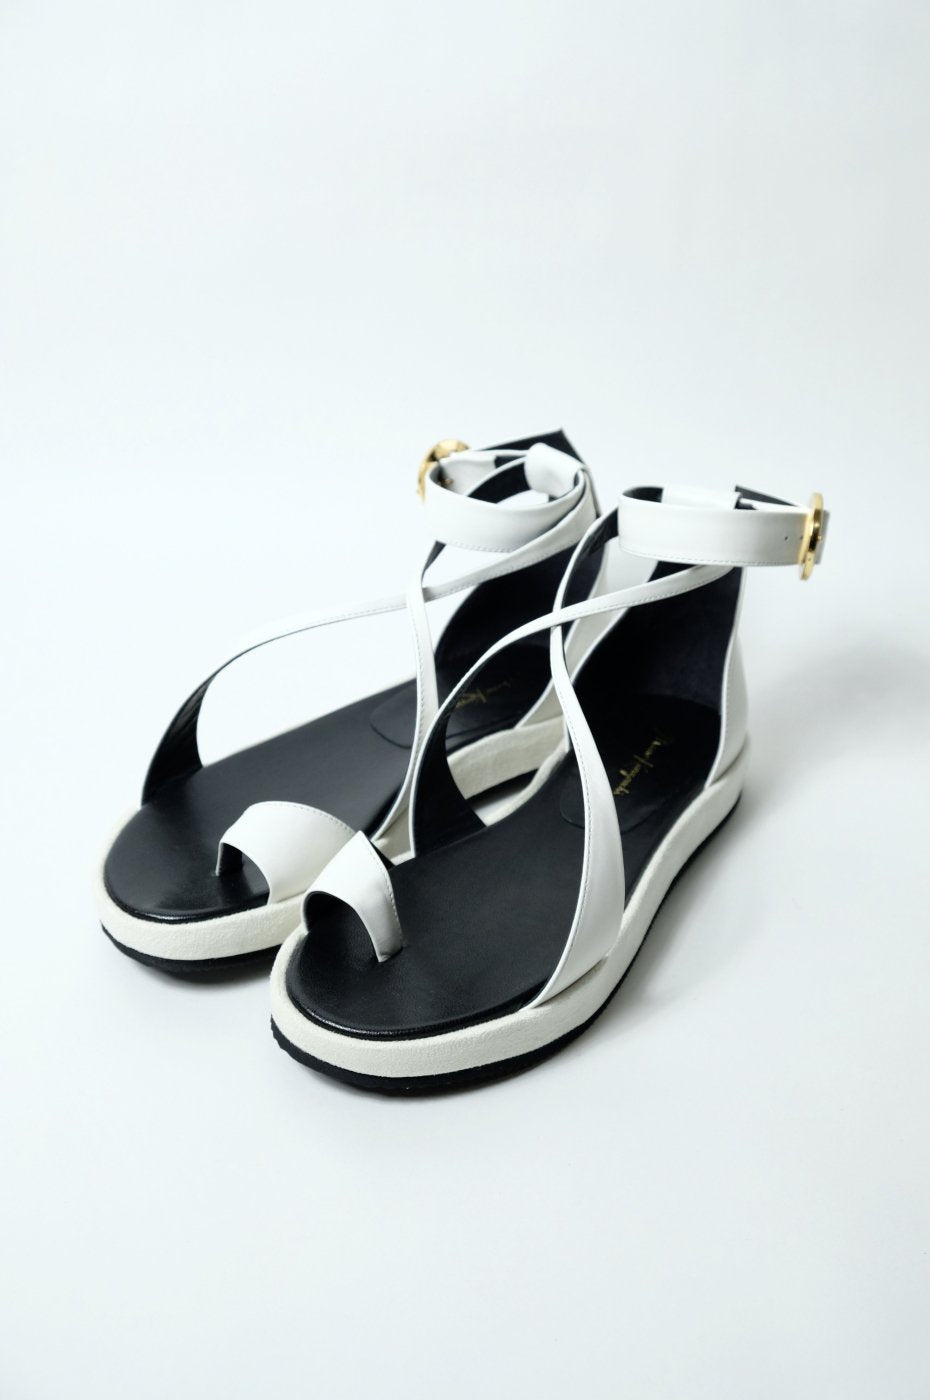 【50%OFF】Mame Kurogouchi "CURVED LINE ANKLE STRAP SANDALS"